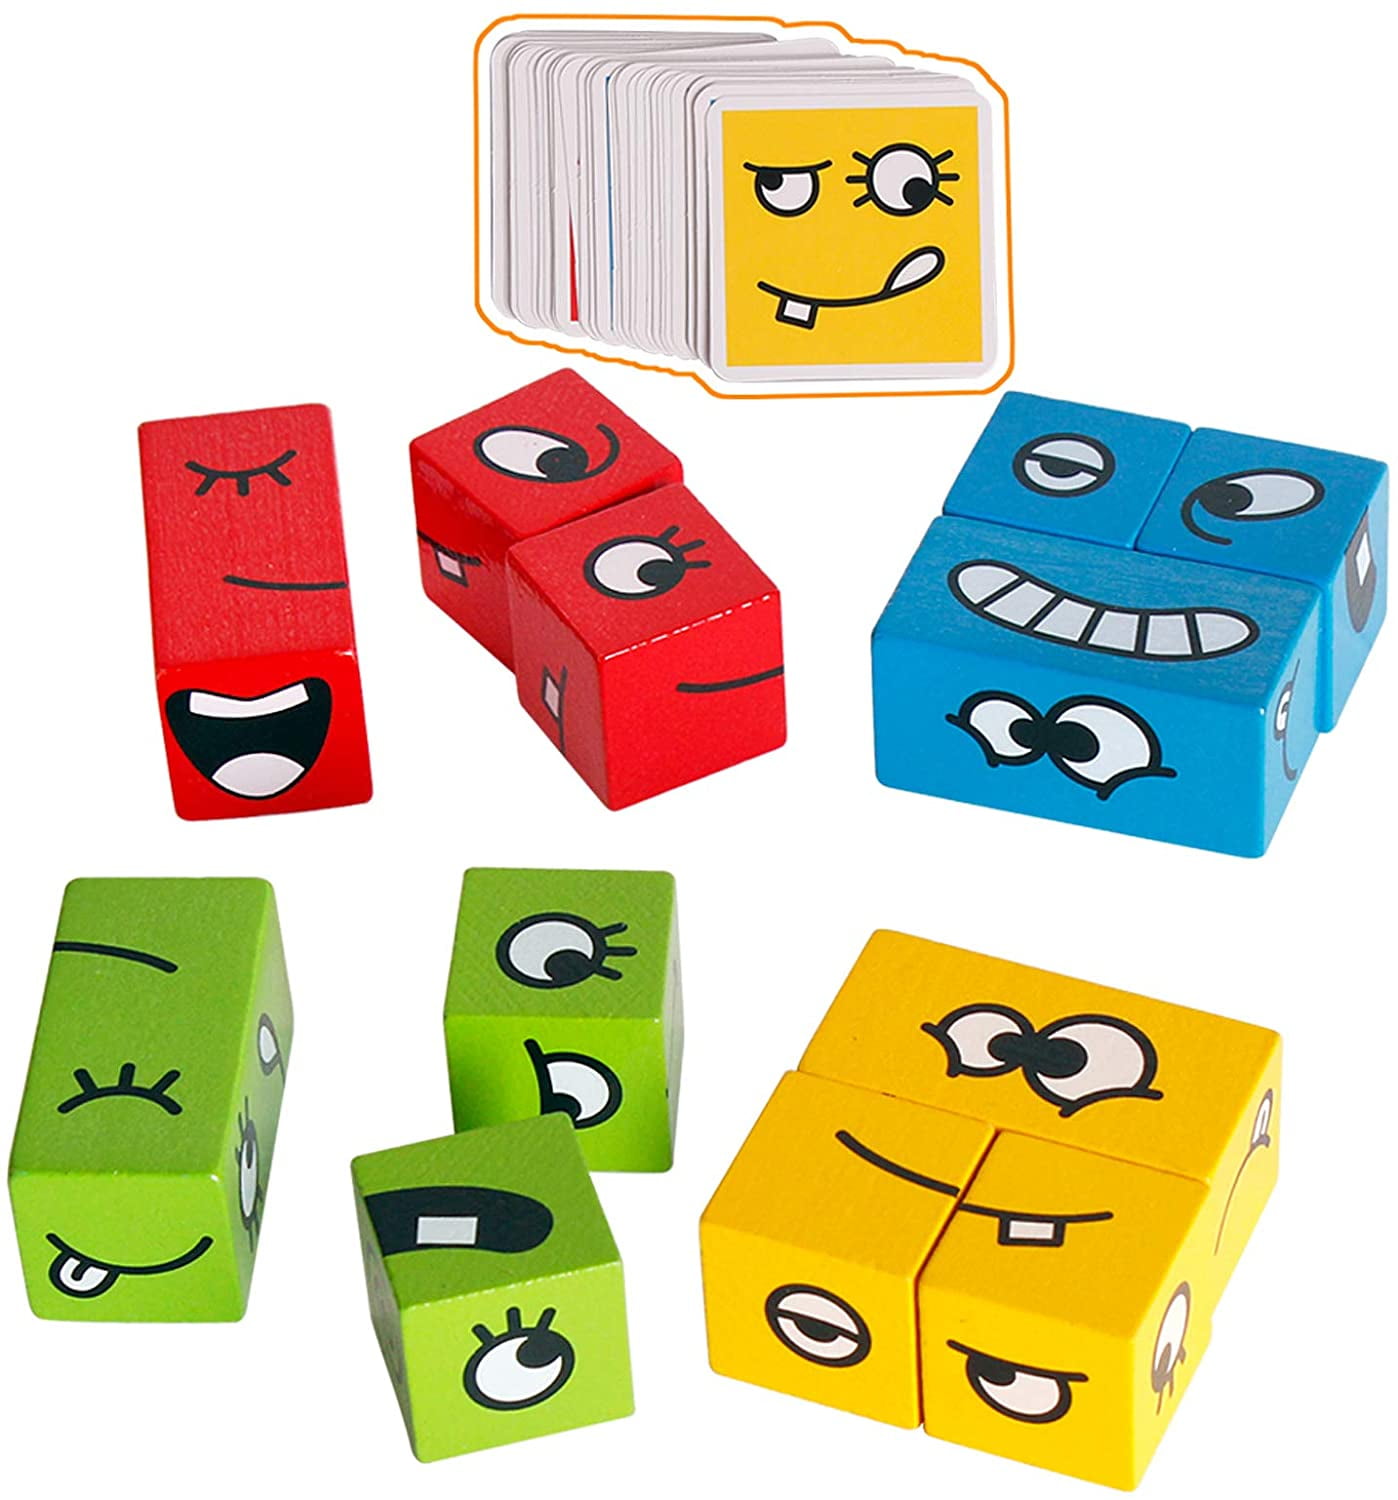 Three Little Puzzle Cubes Are We: MW Puzzles – Puzzle Ramblings